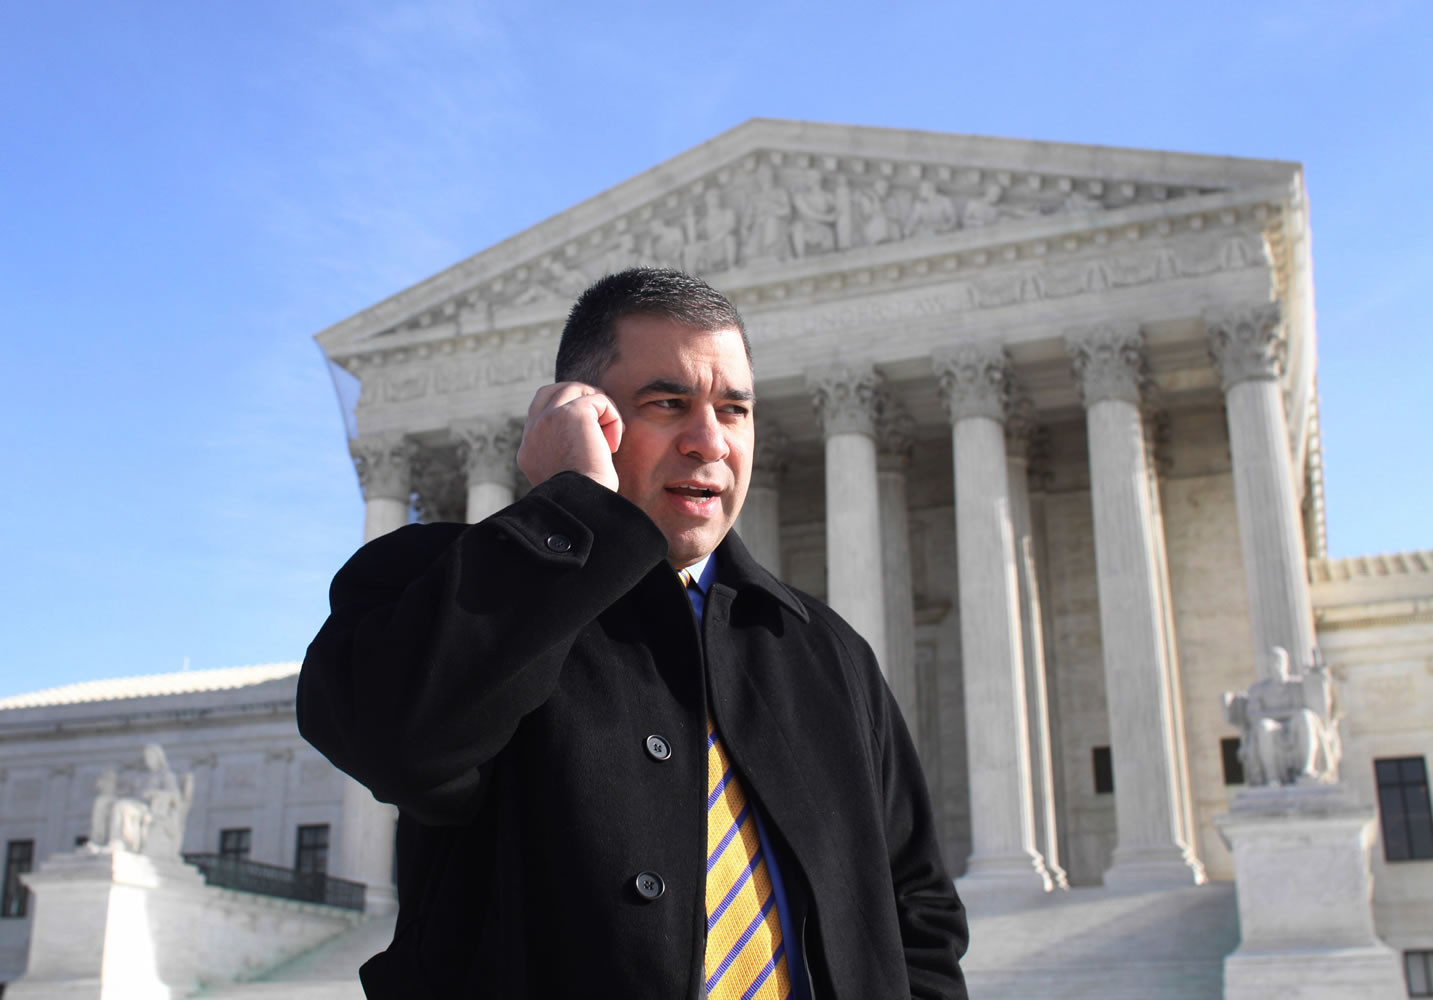 Citizens United President David Bossie talks on his phone outside the Supreme Court in January 2010 after the 5-4 ruling that allowed corporations and labor unions to spend unlimited sums in support of or opposition to candidates.